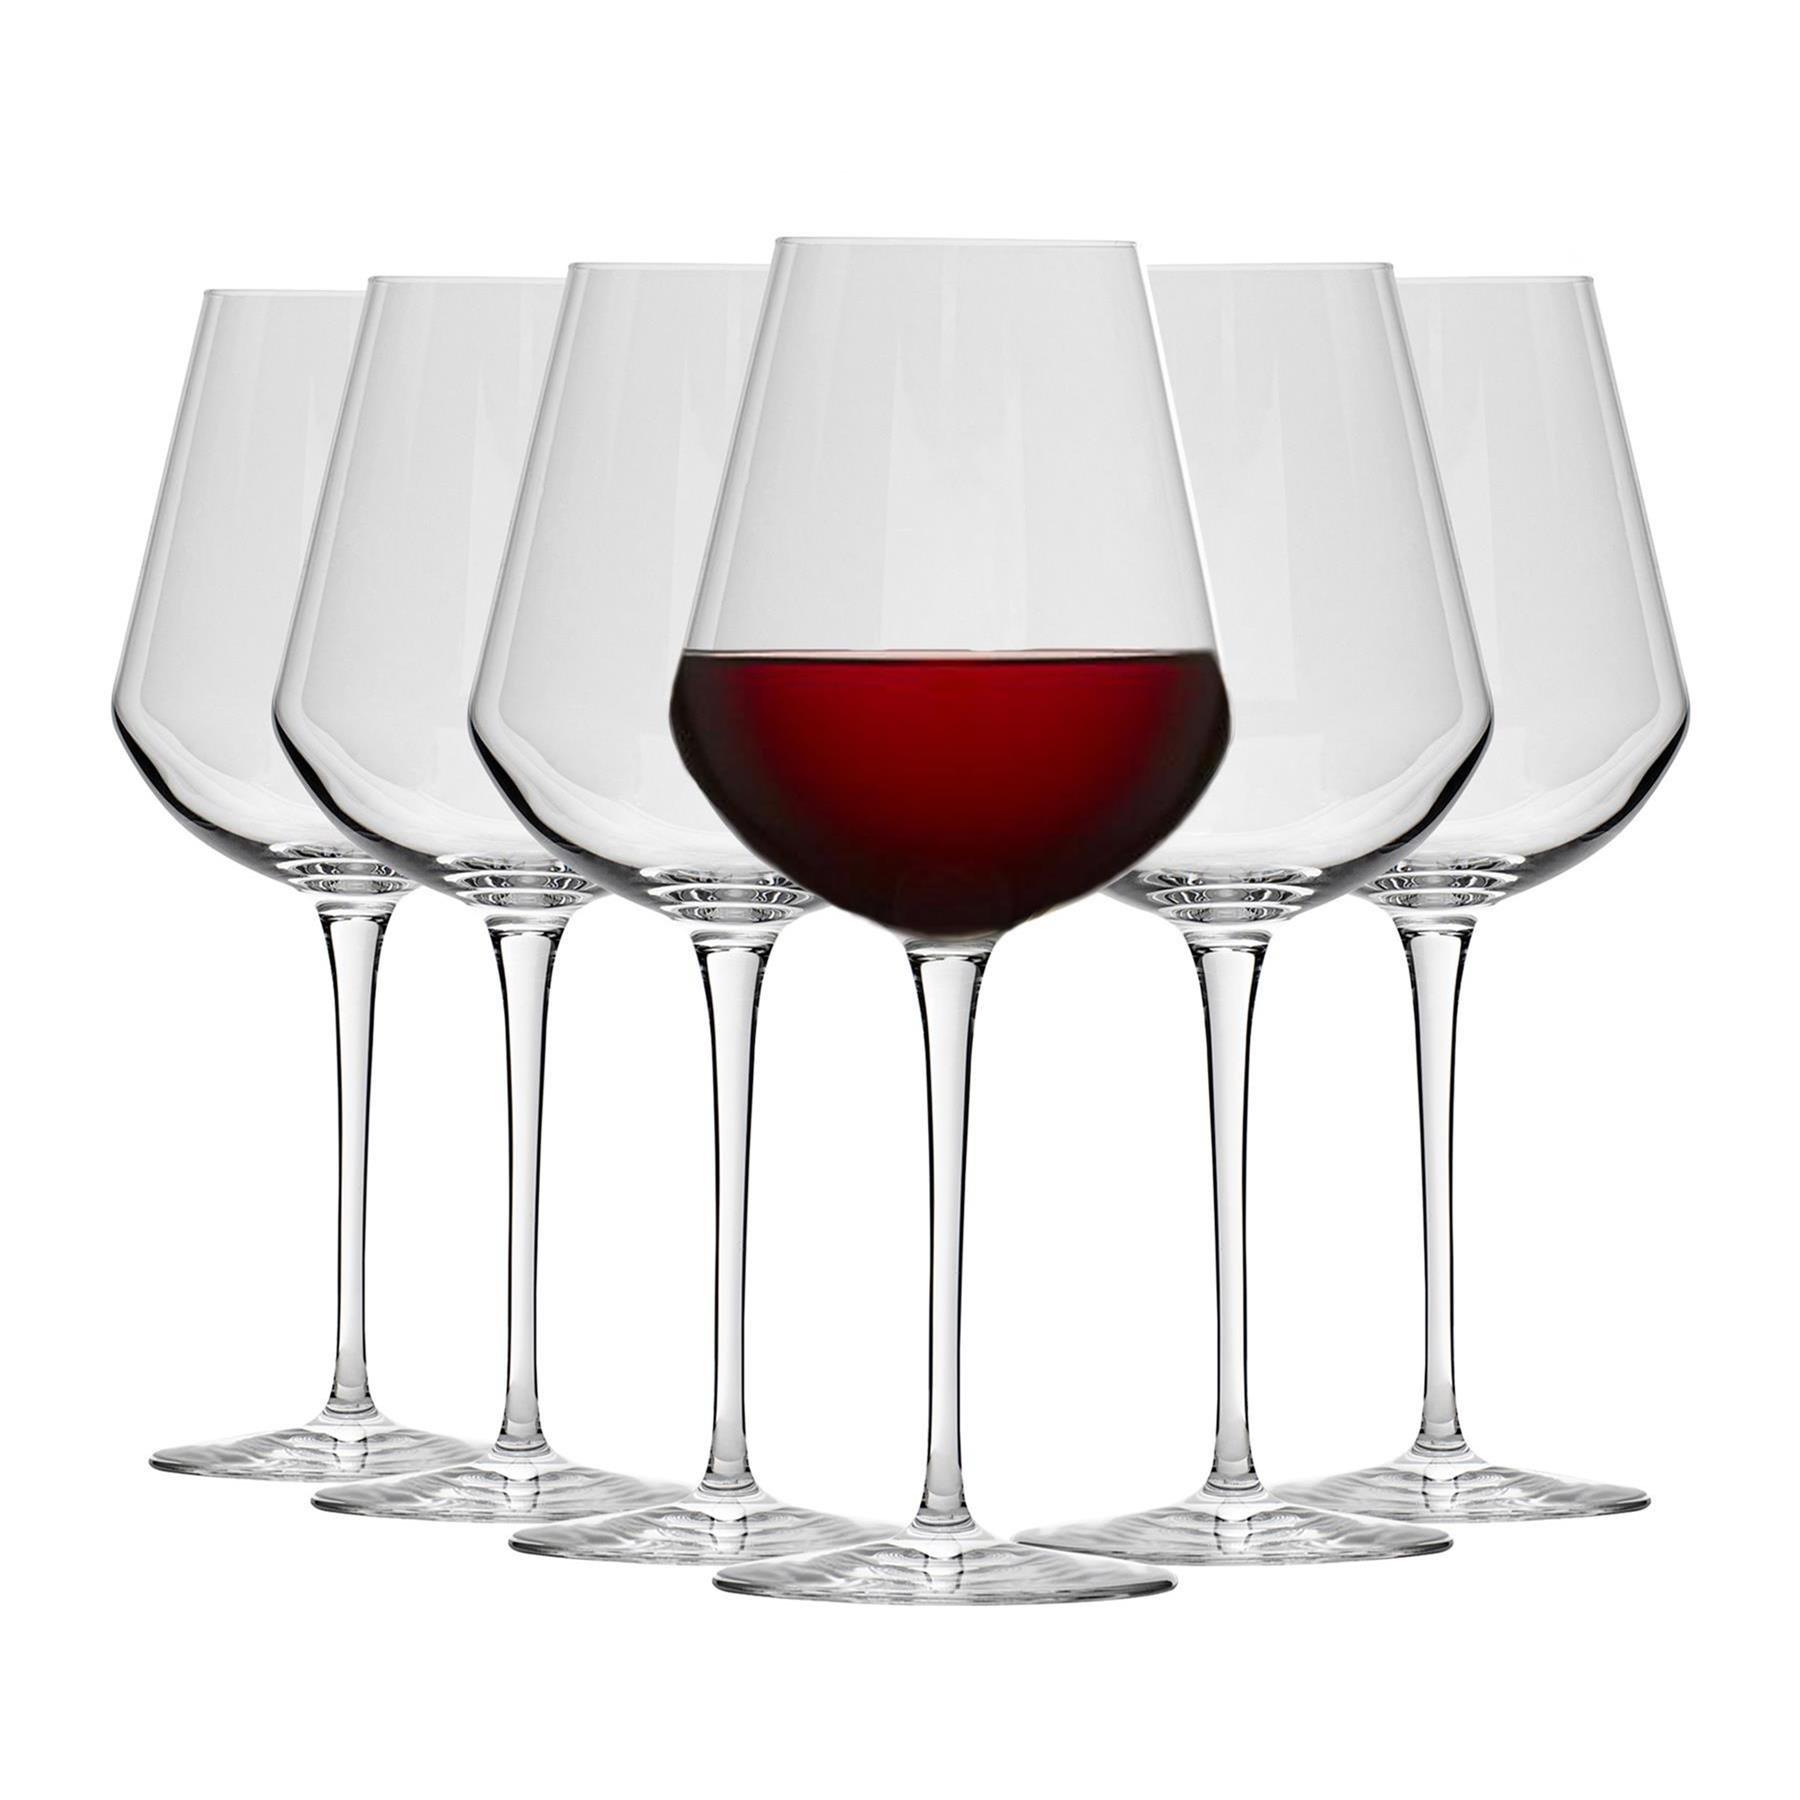 Inalto Uno Red Wine Glasses - 640ml - Pack of 12